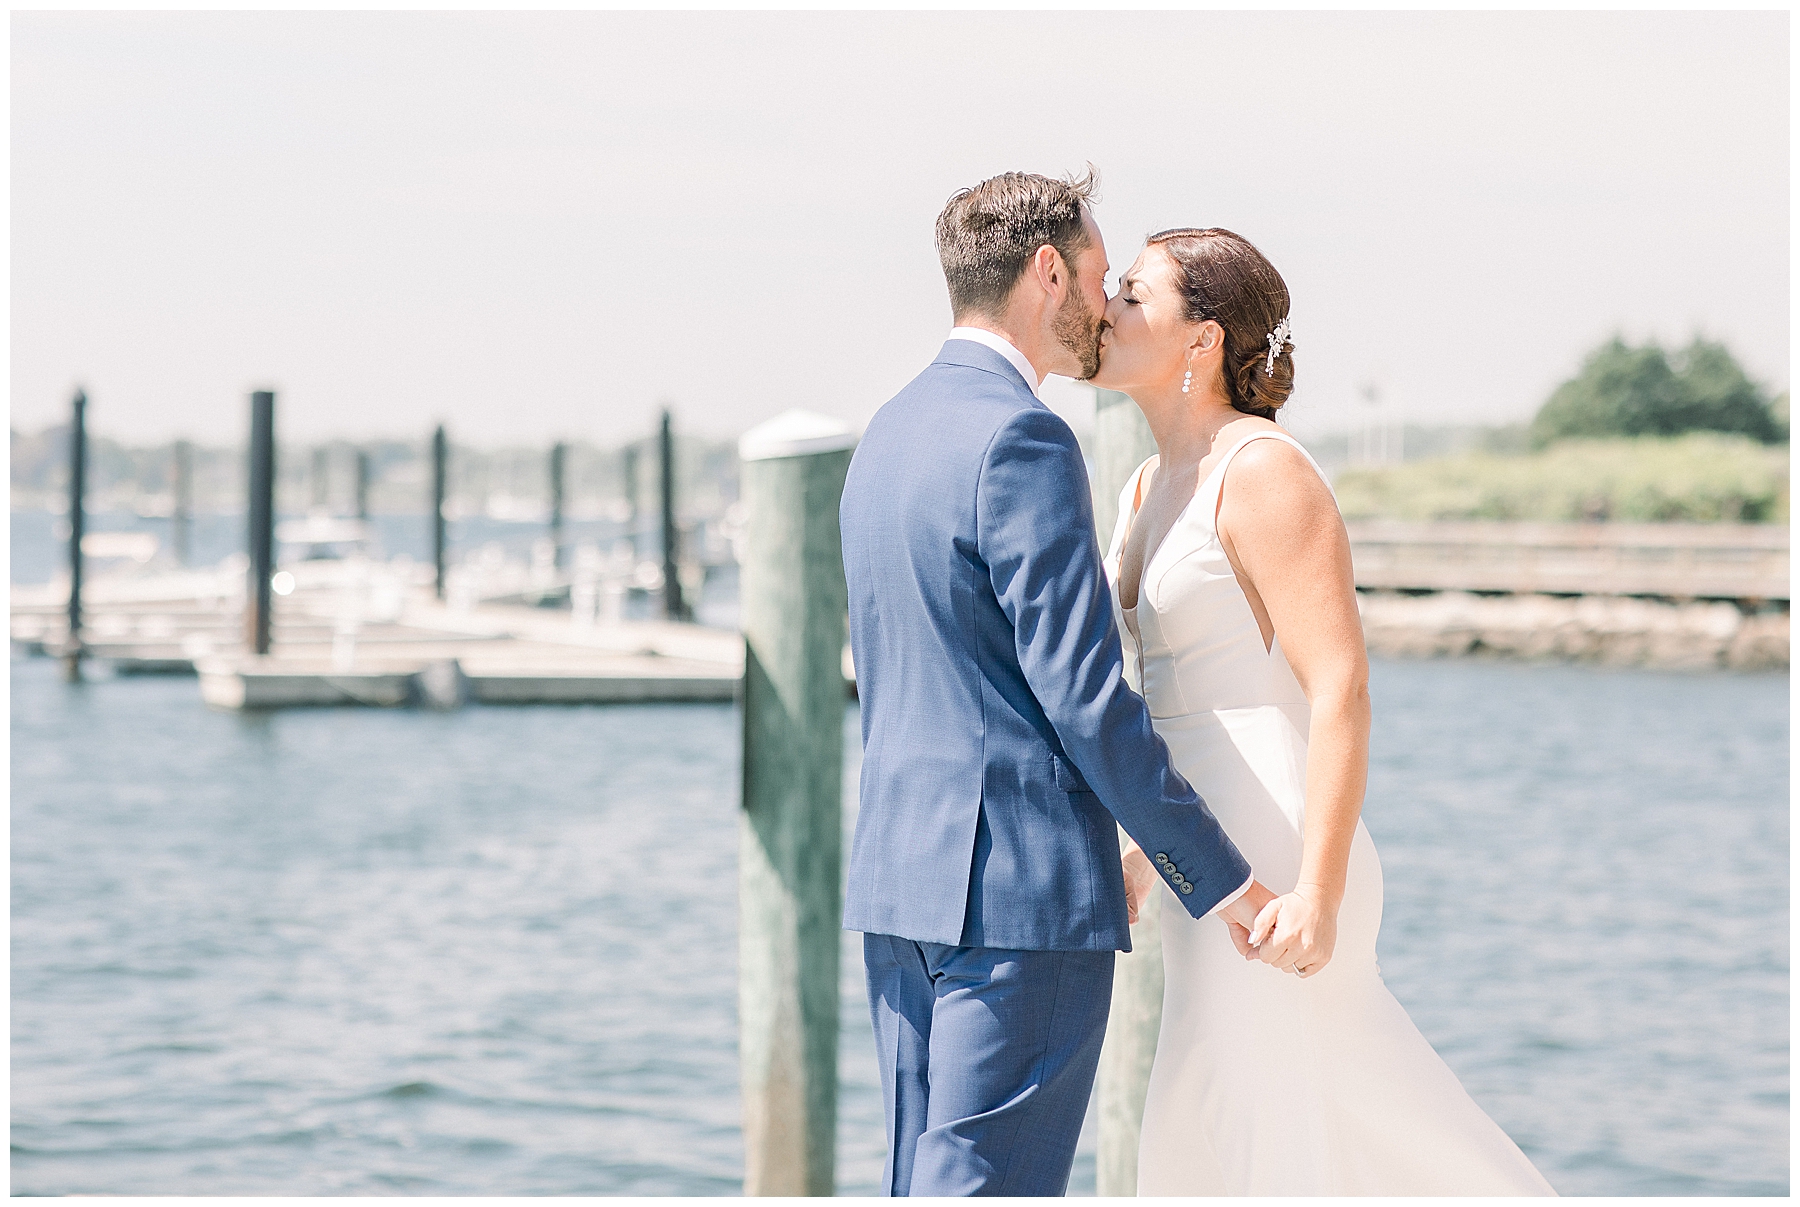 candid picture of bride + groom kissing on boat dock